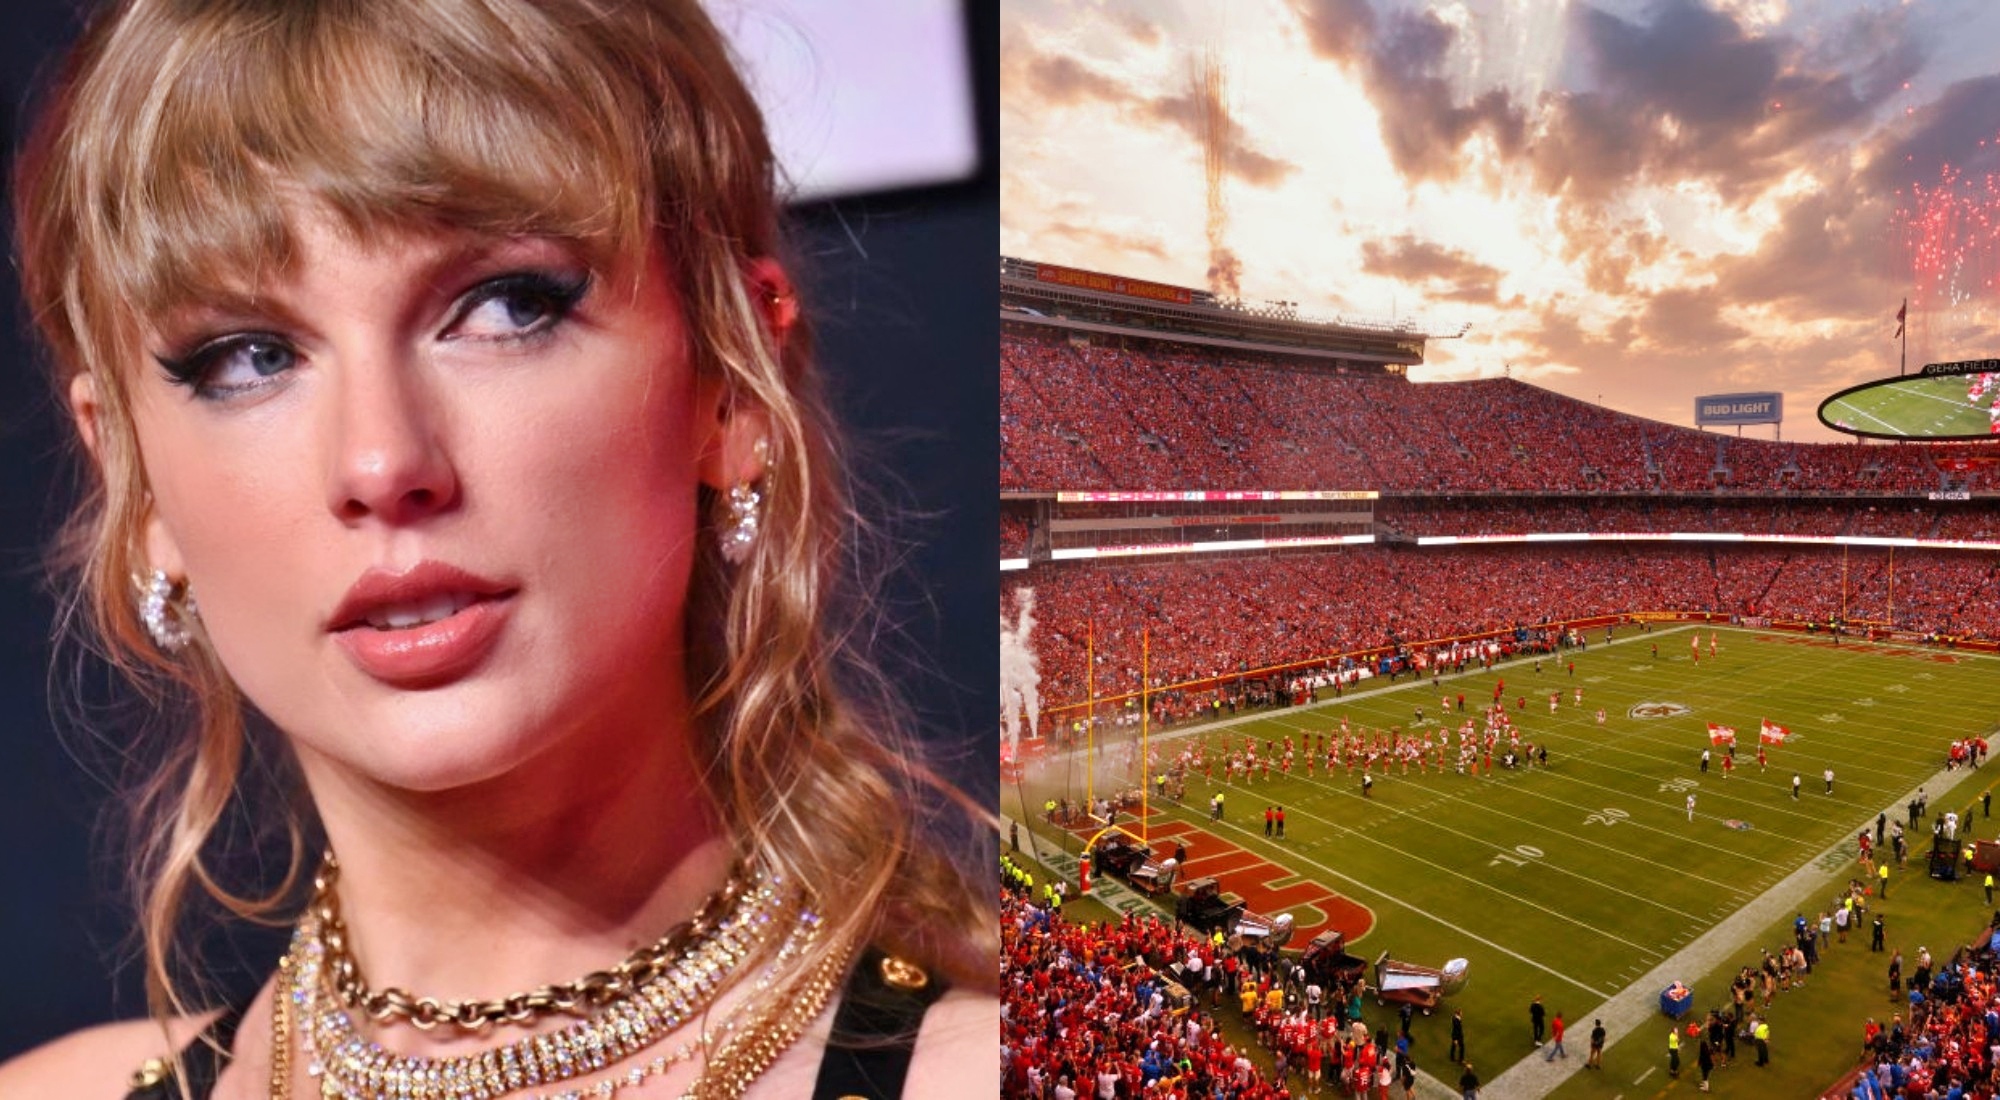 BREAKING Taylor Swift Attending ChiefsBears Game At